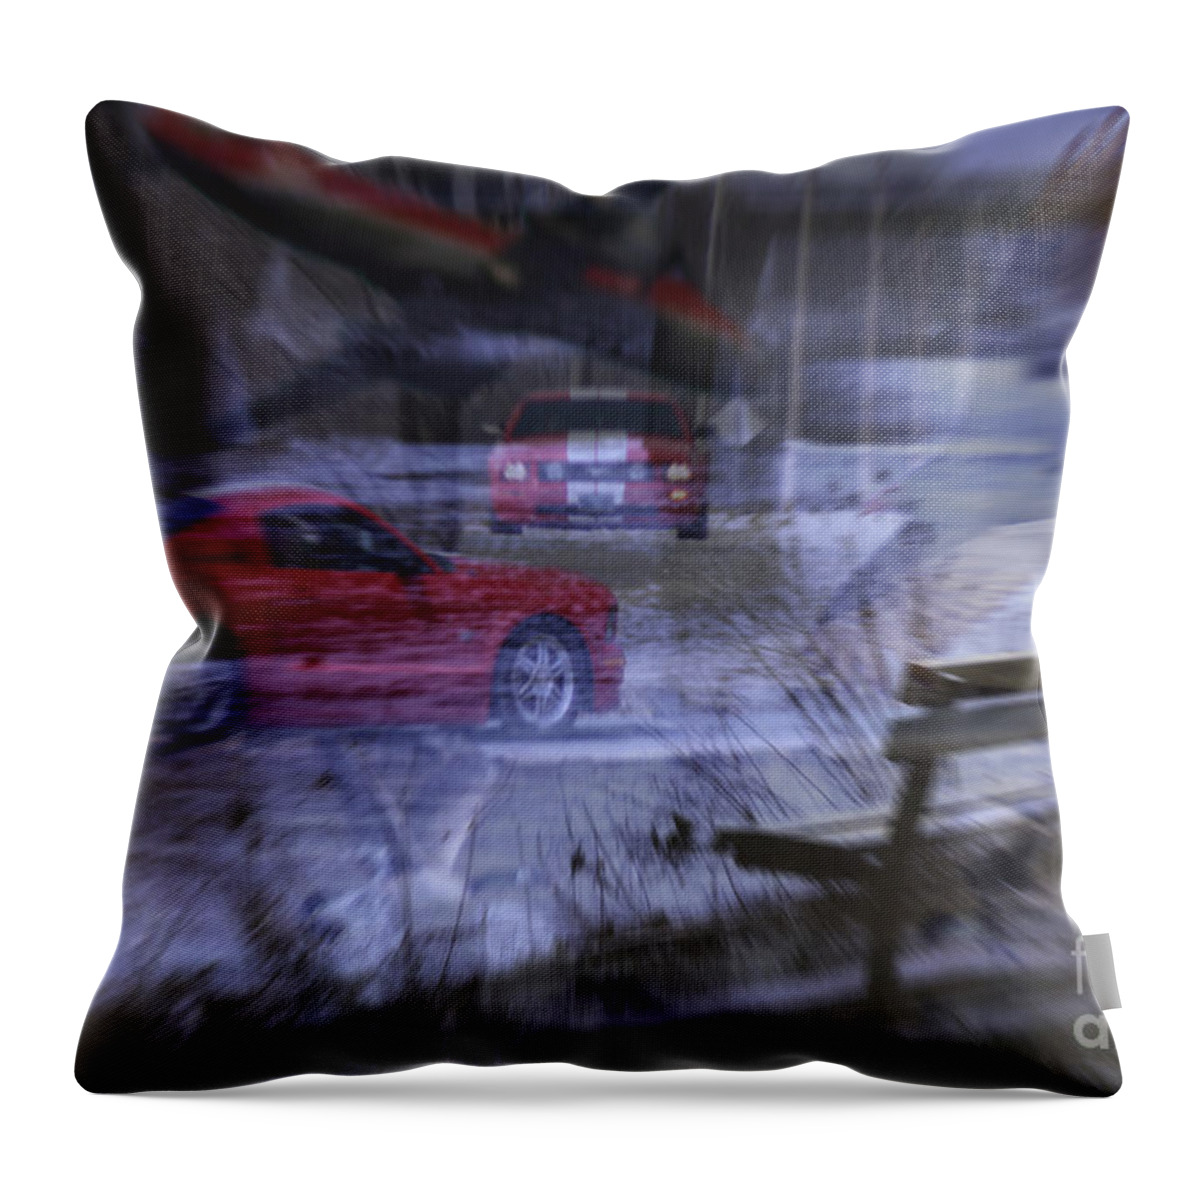 Life Throw Pillow featuring the digital art Deceptions by Cathy Beharriell